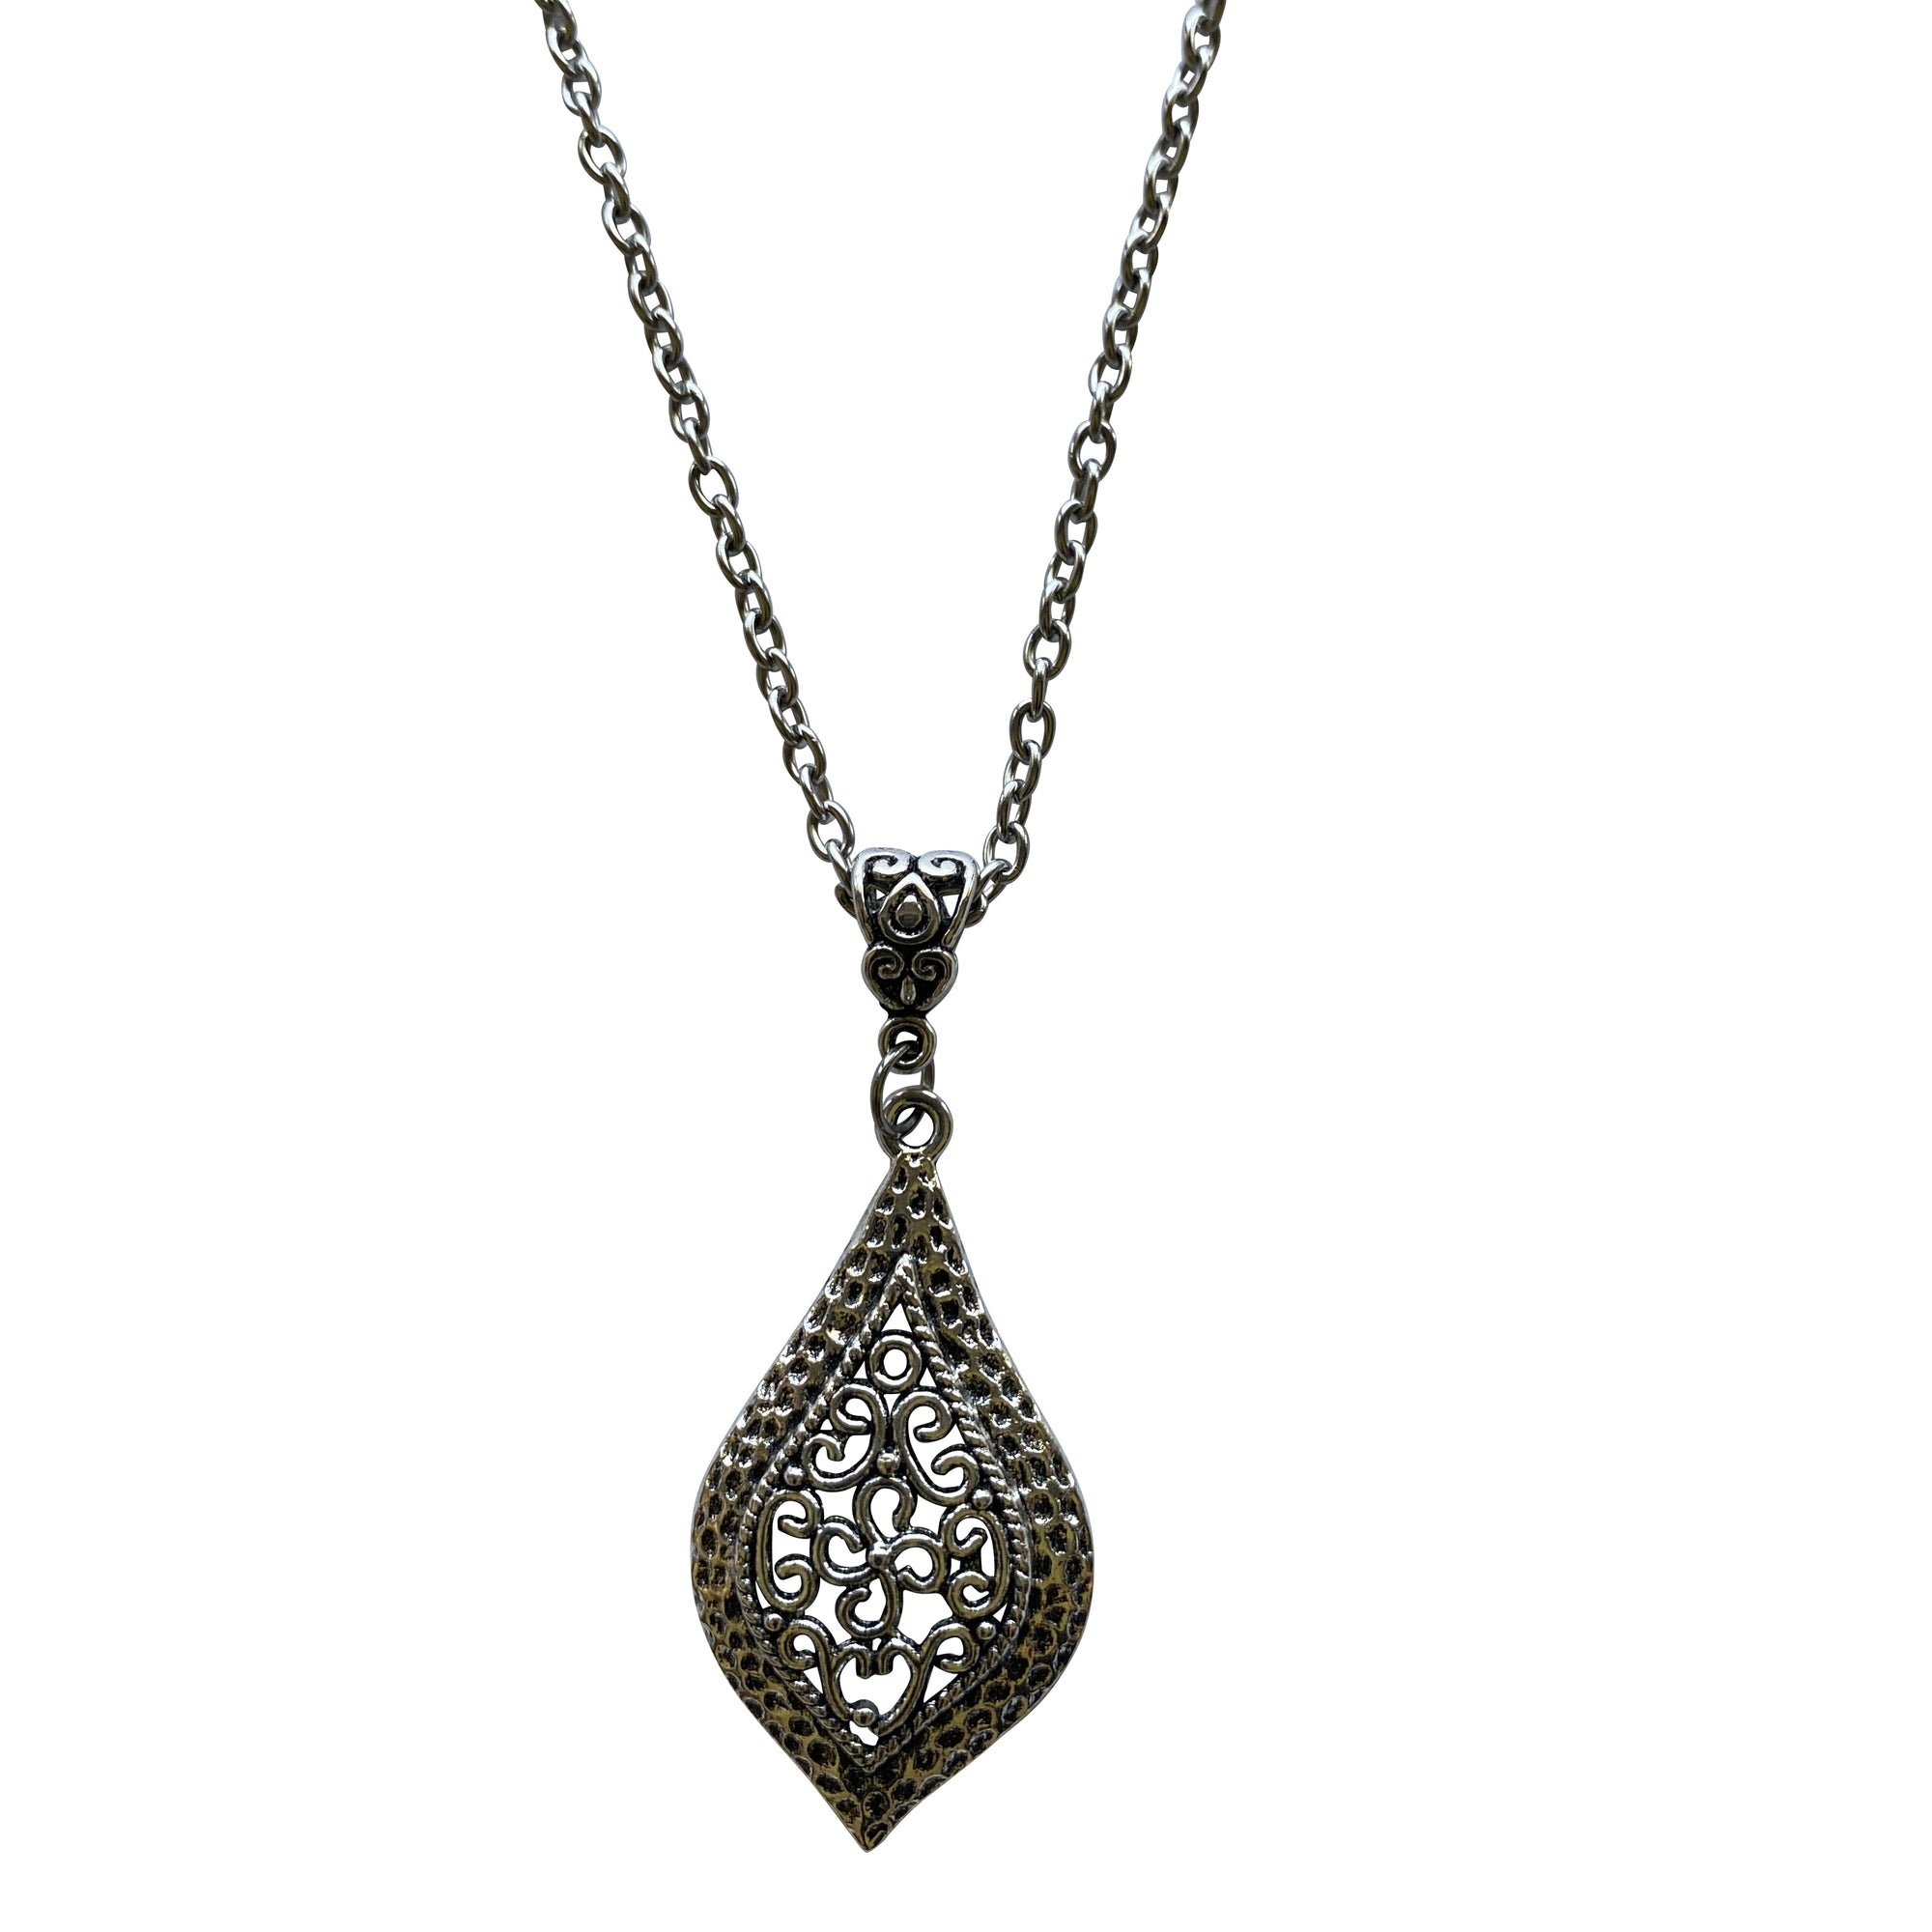 Silver Filigree Pendant Necklace with Stainless Steel Chain